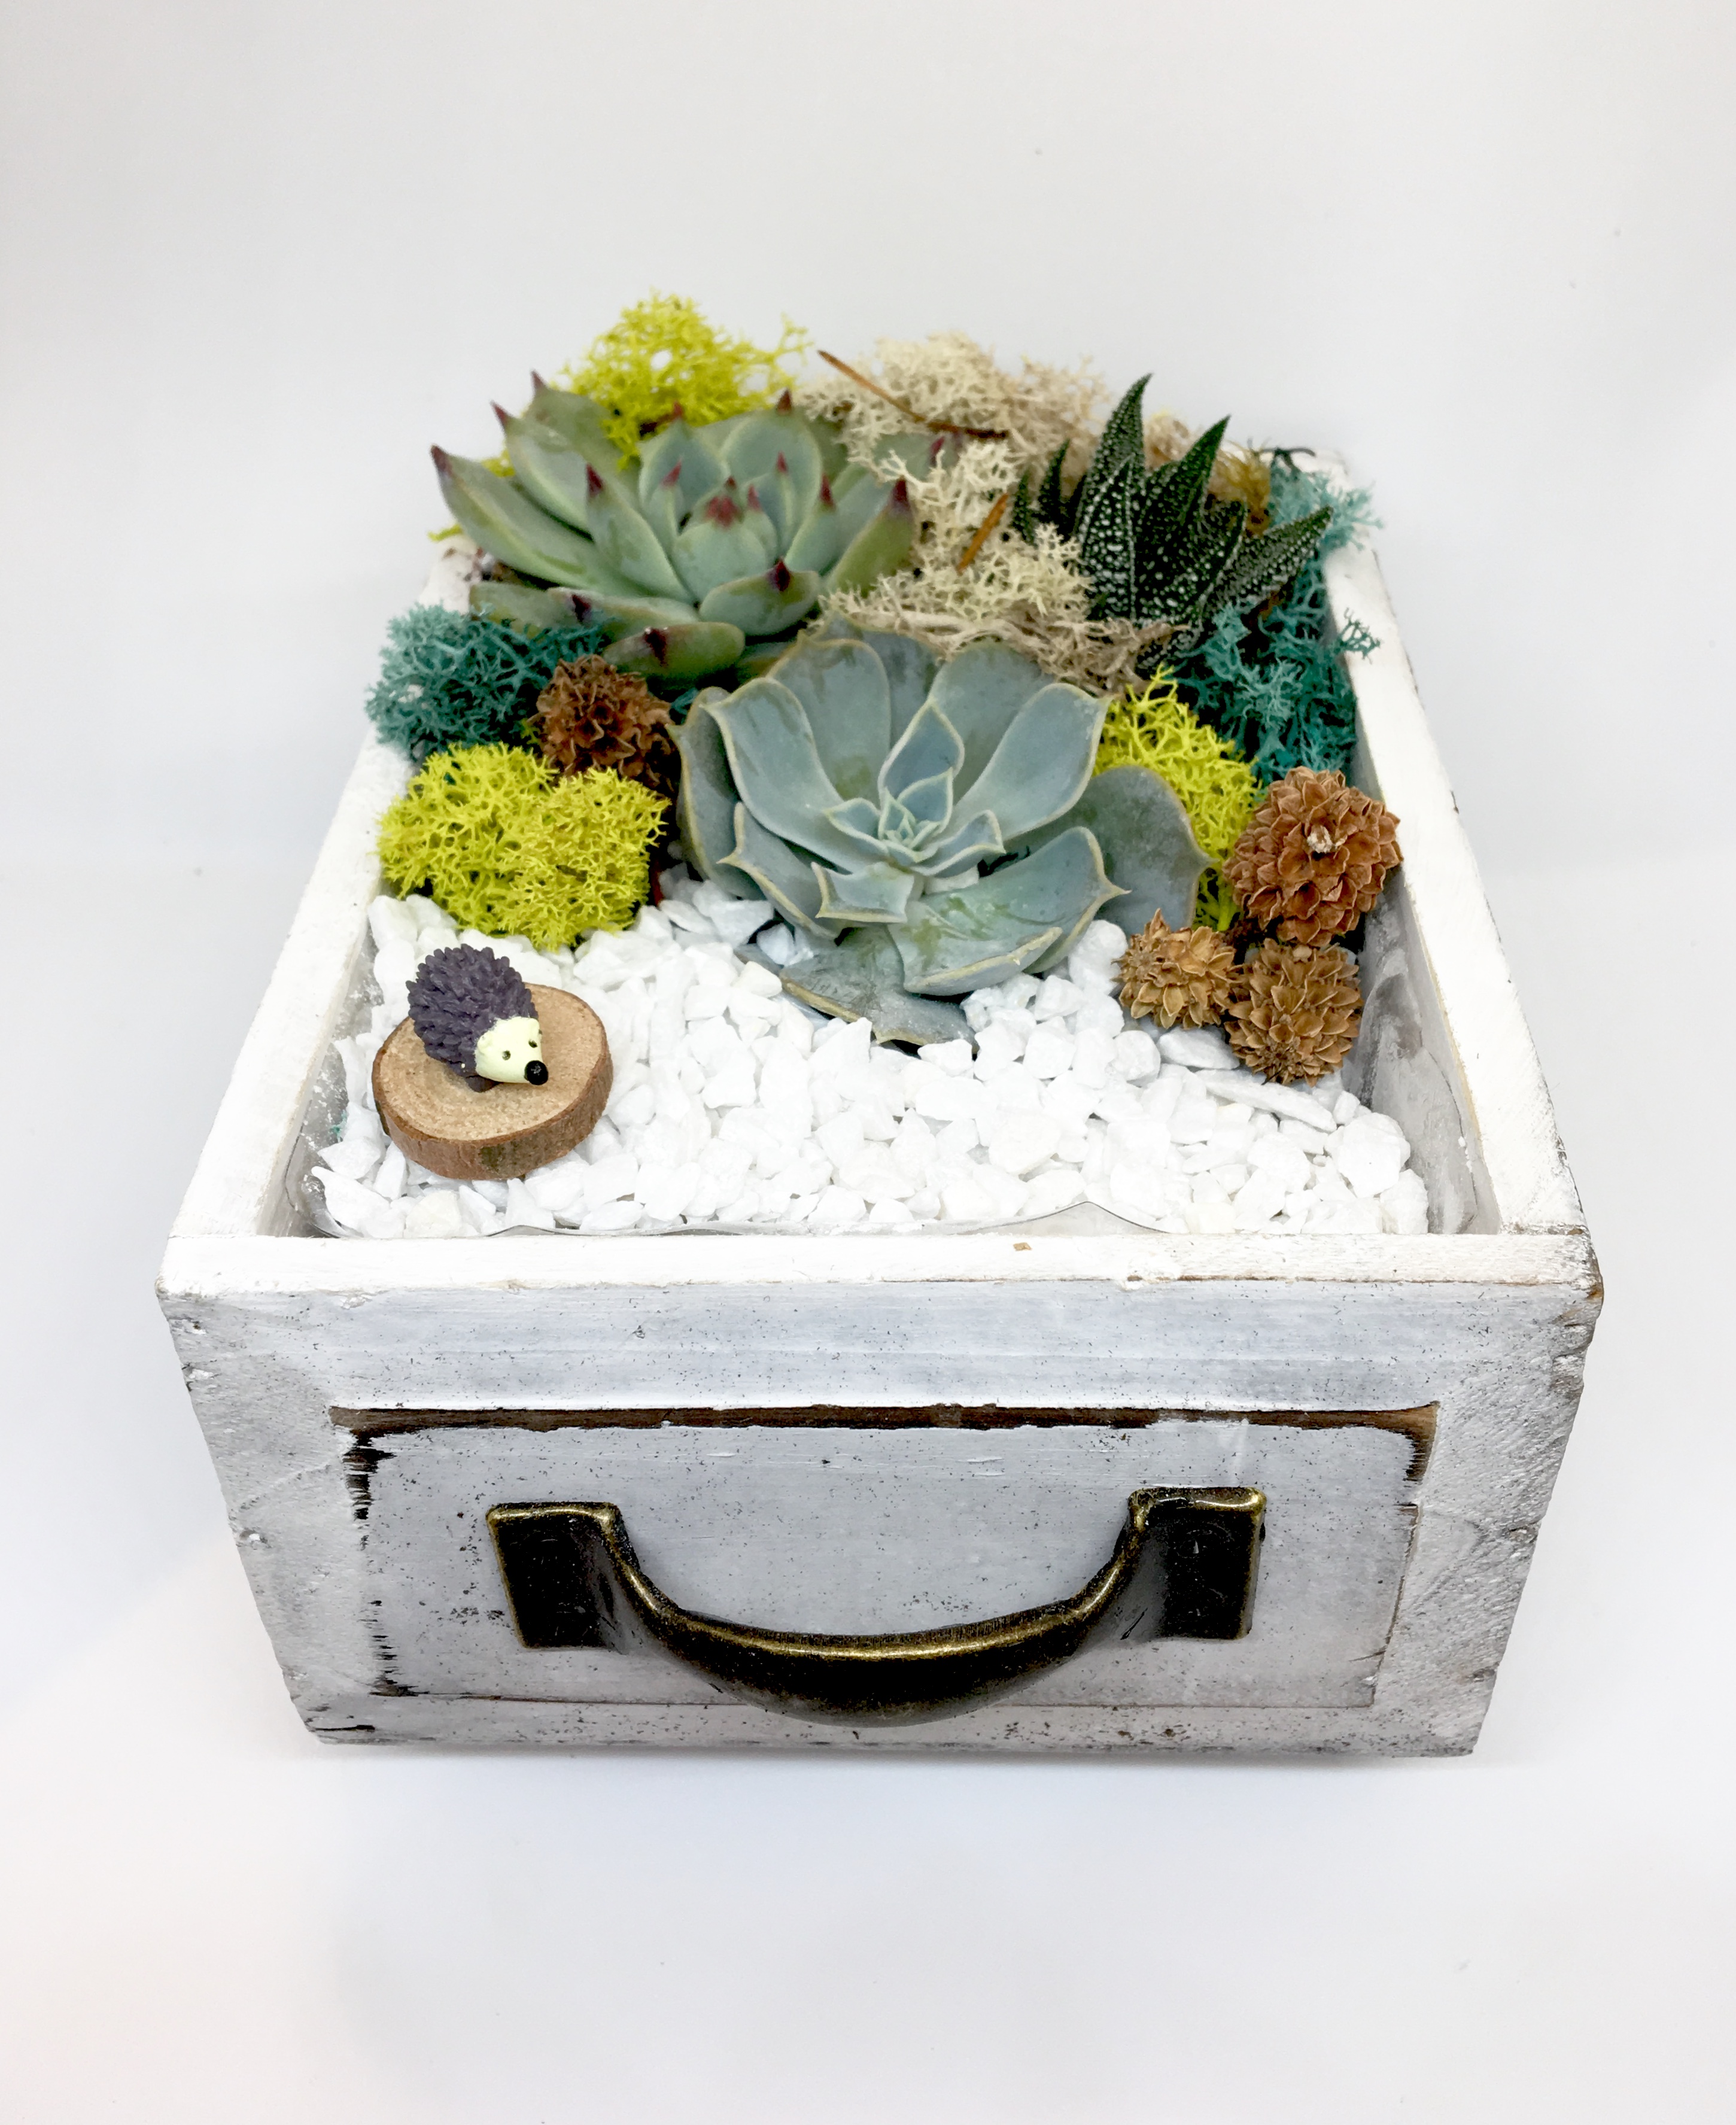 A Hedgehog Wood Drawer plant nite project by Yaymaker